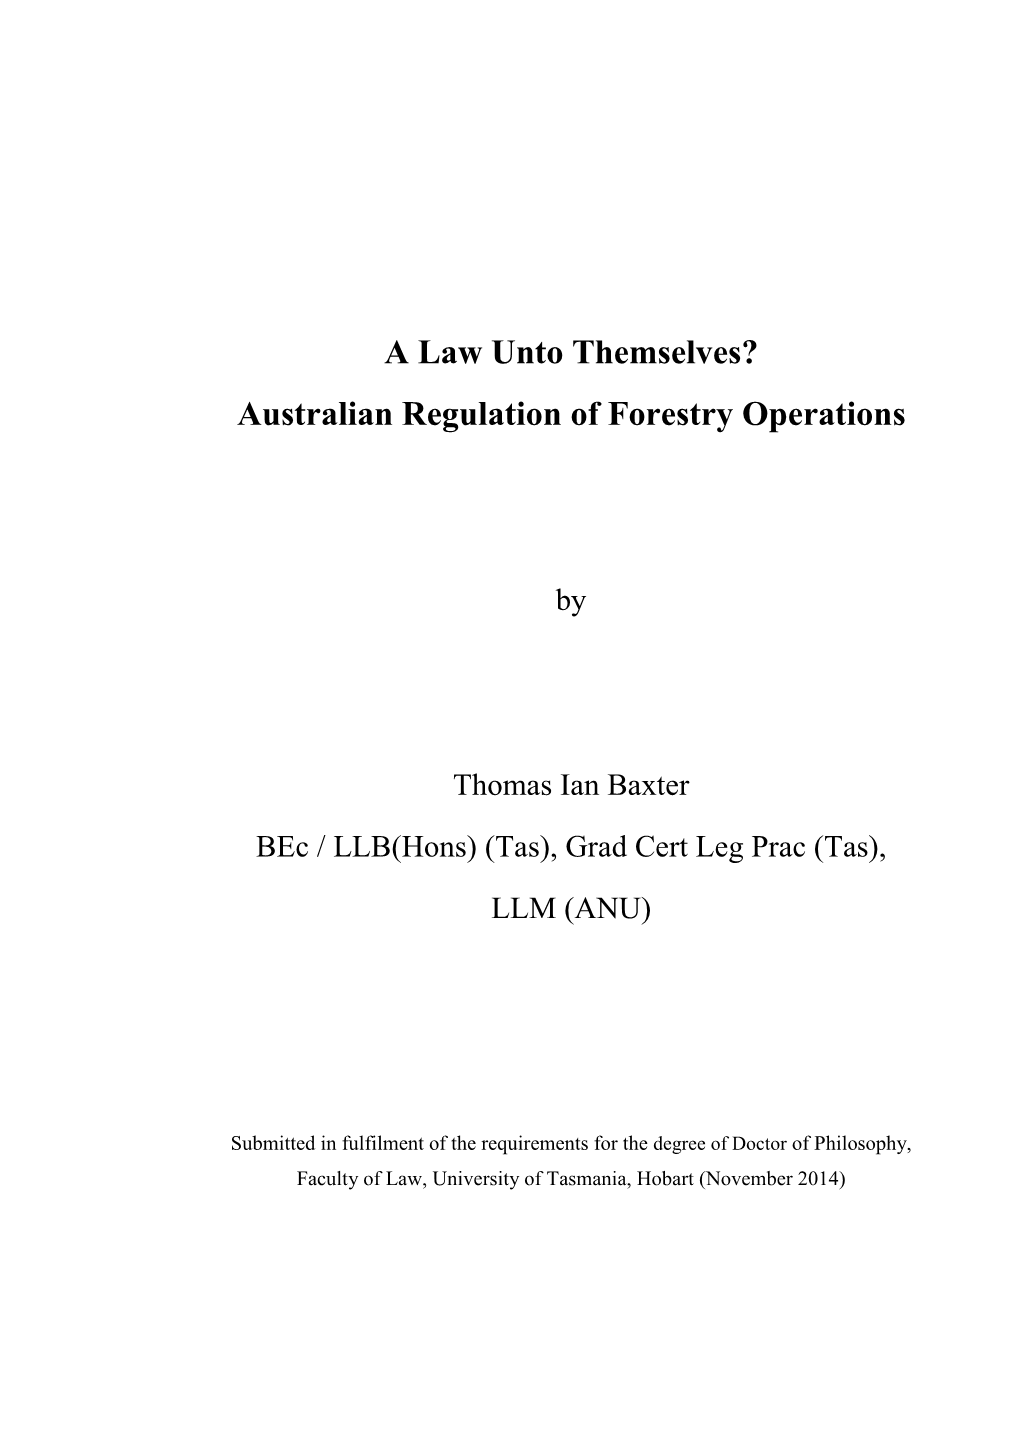 A Law Unto Themselves? Australian Regulation of Forestry Operations